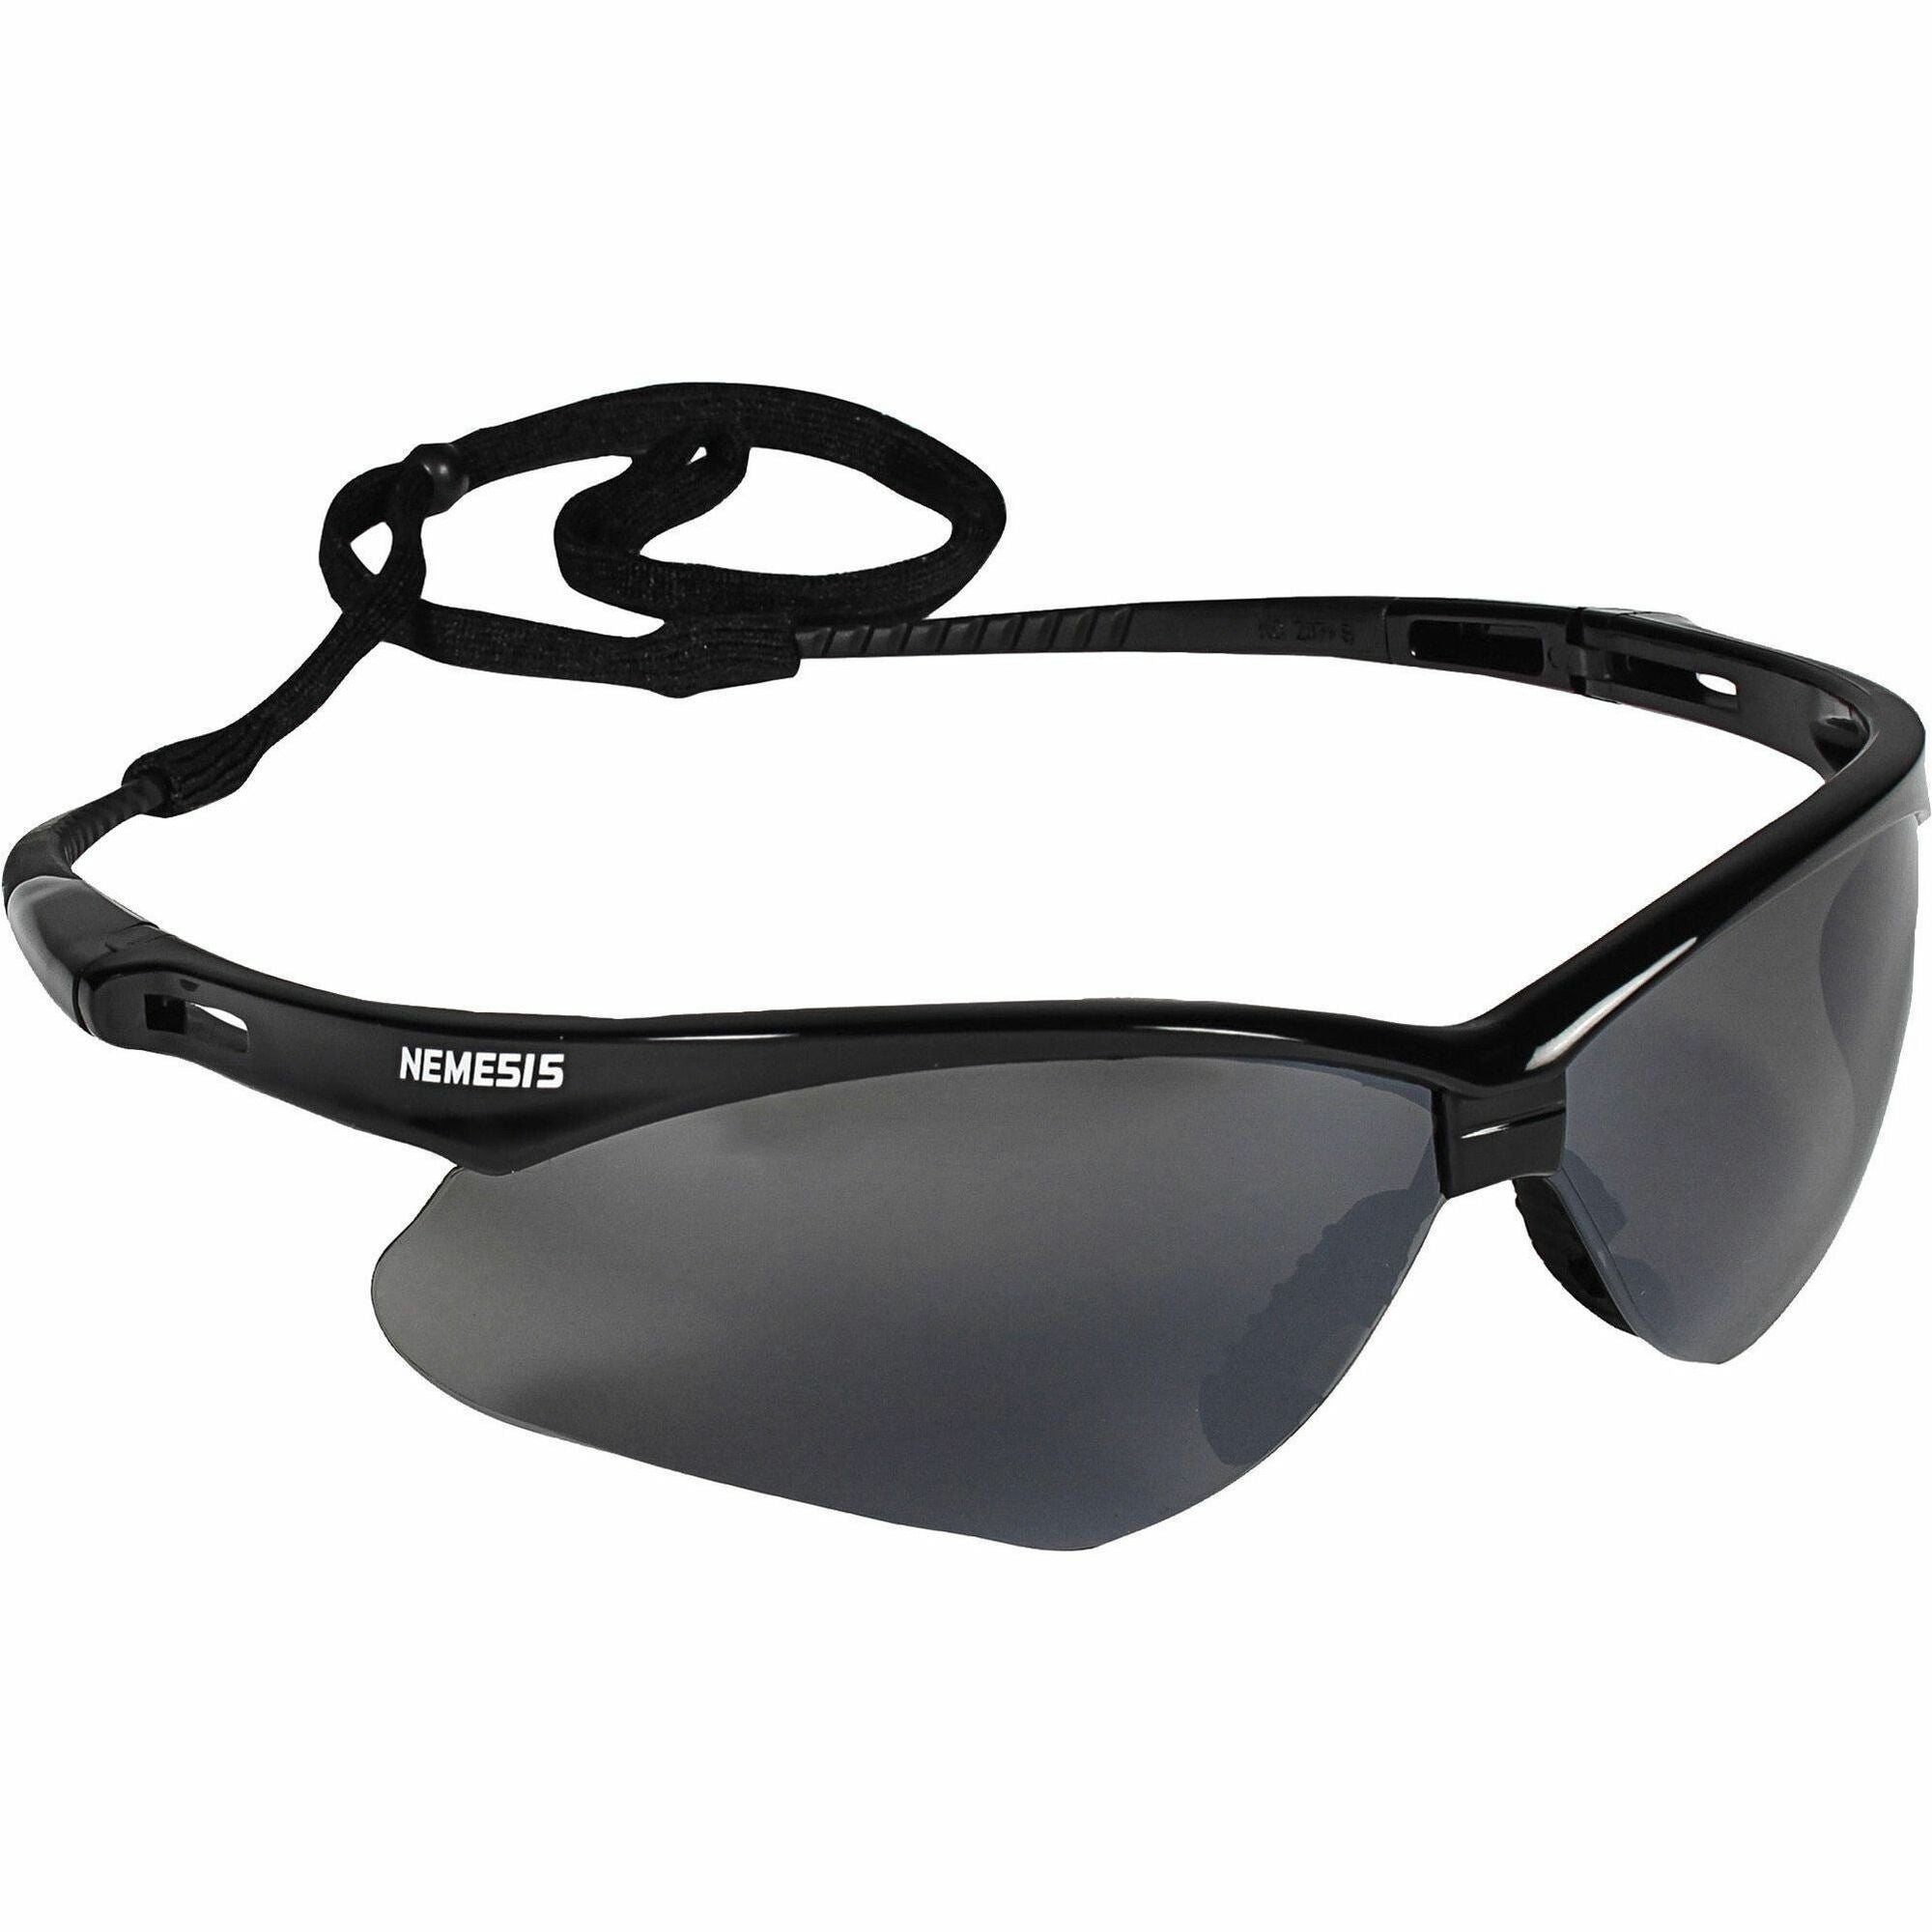 kleenguard-v30-nemesis-safety-eyewear-recommended-for-manufacturing-construction-shooting-industrial-ultraviolet-protection-smoke-lens-black-frame-flexible-lightweight-comfortable-scratch-resistant-12-carton_kcc25688ct - 1